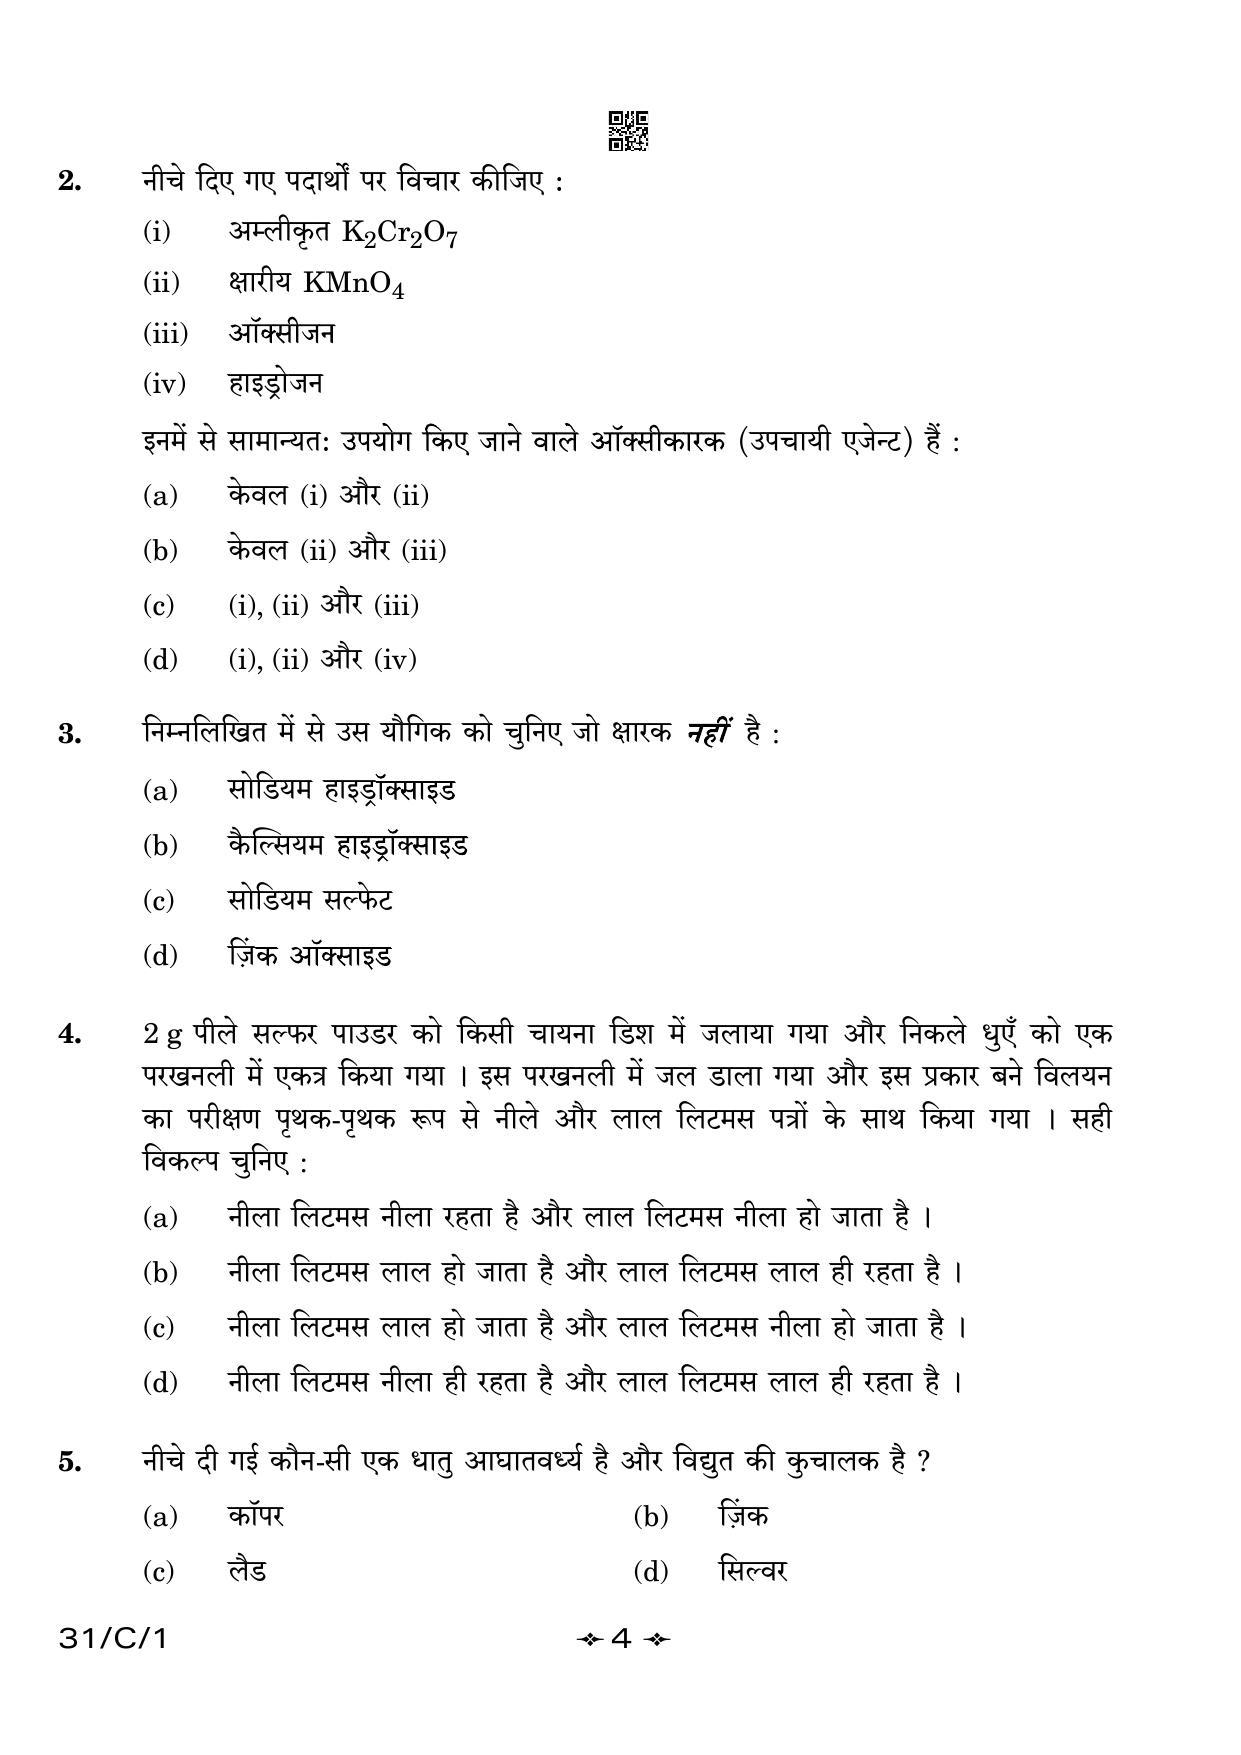 CBSE Class 10 31-1 Science 2023 (Compartment) Question Paper - Page 4